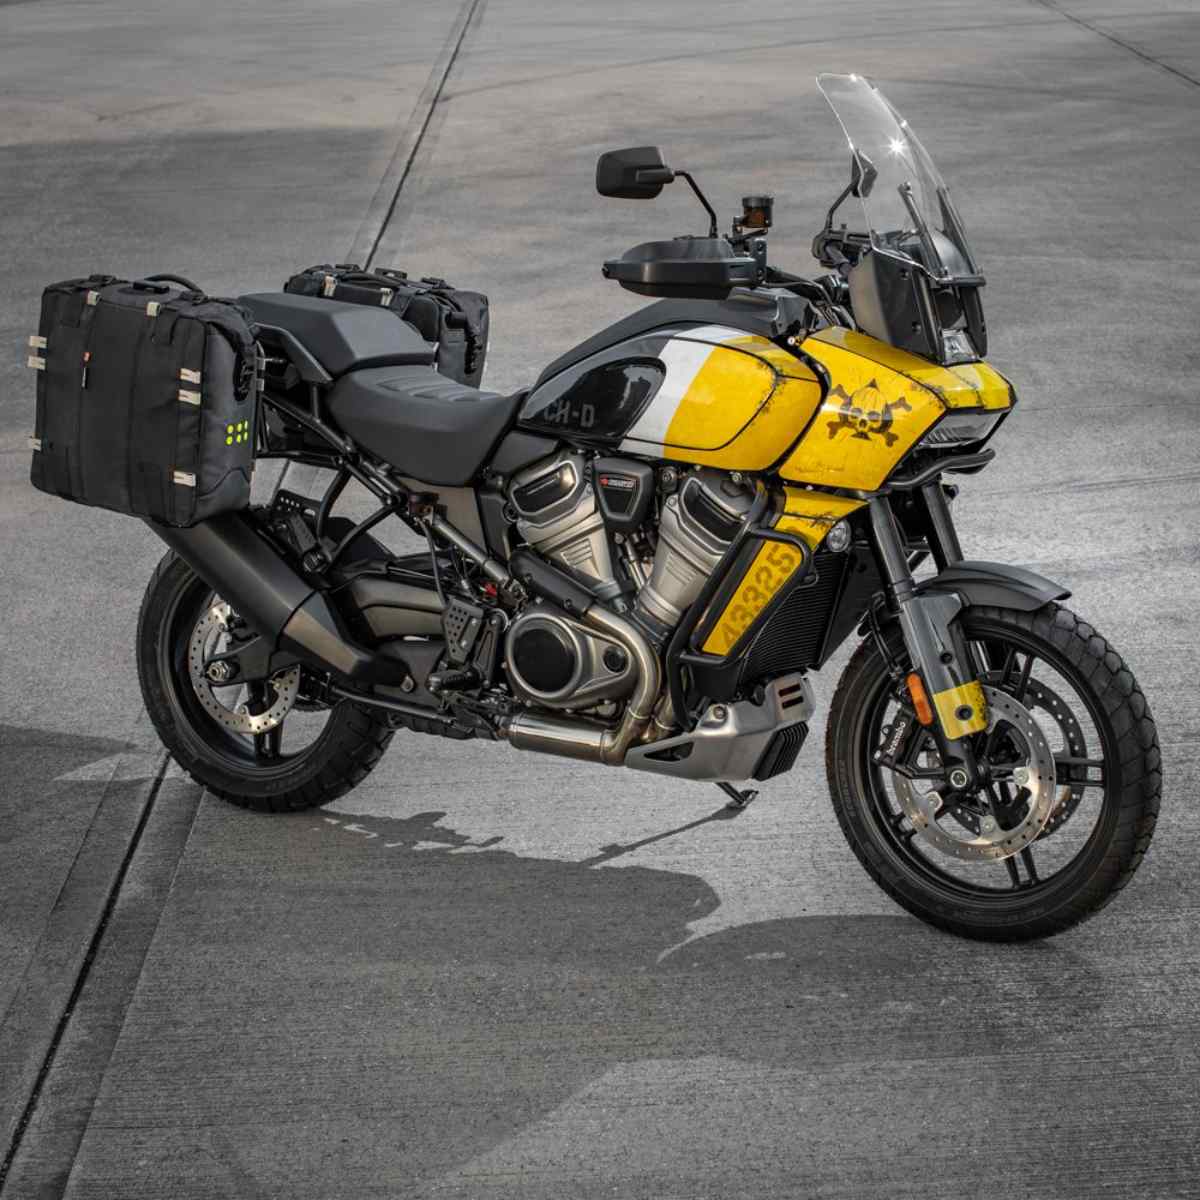 Kriega Overlander-S OS-38 Soft Pannier WP: Serious luggage for serious adventures